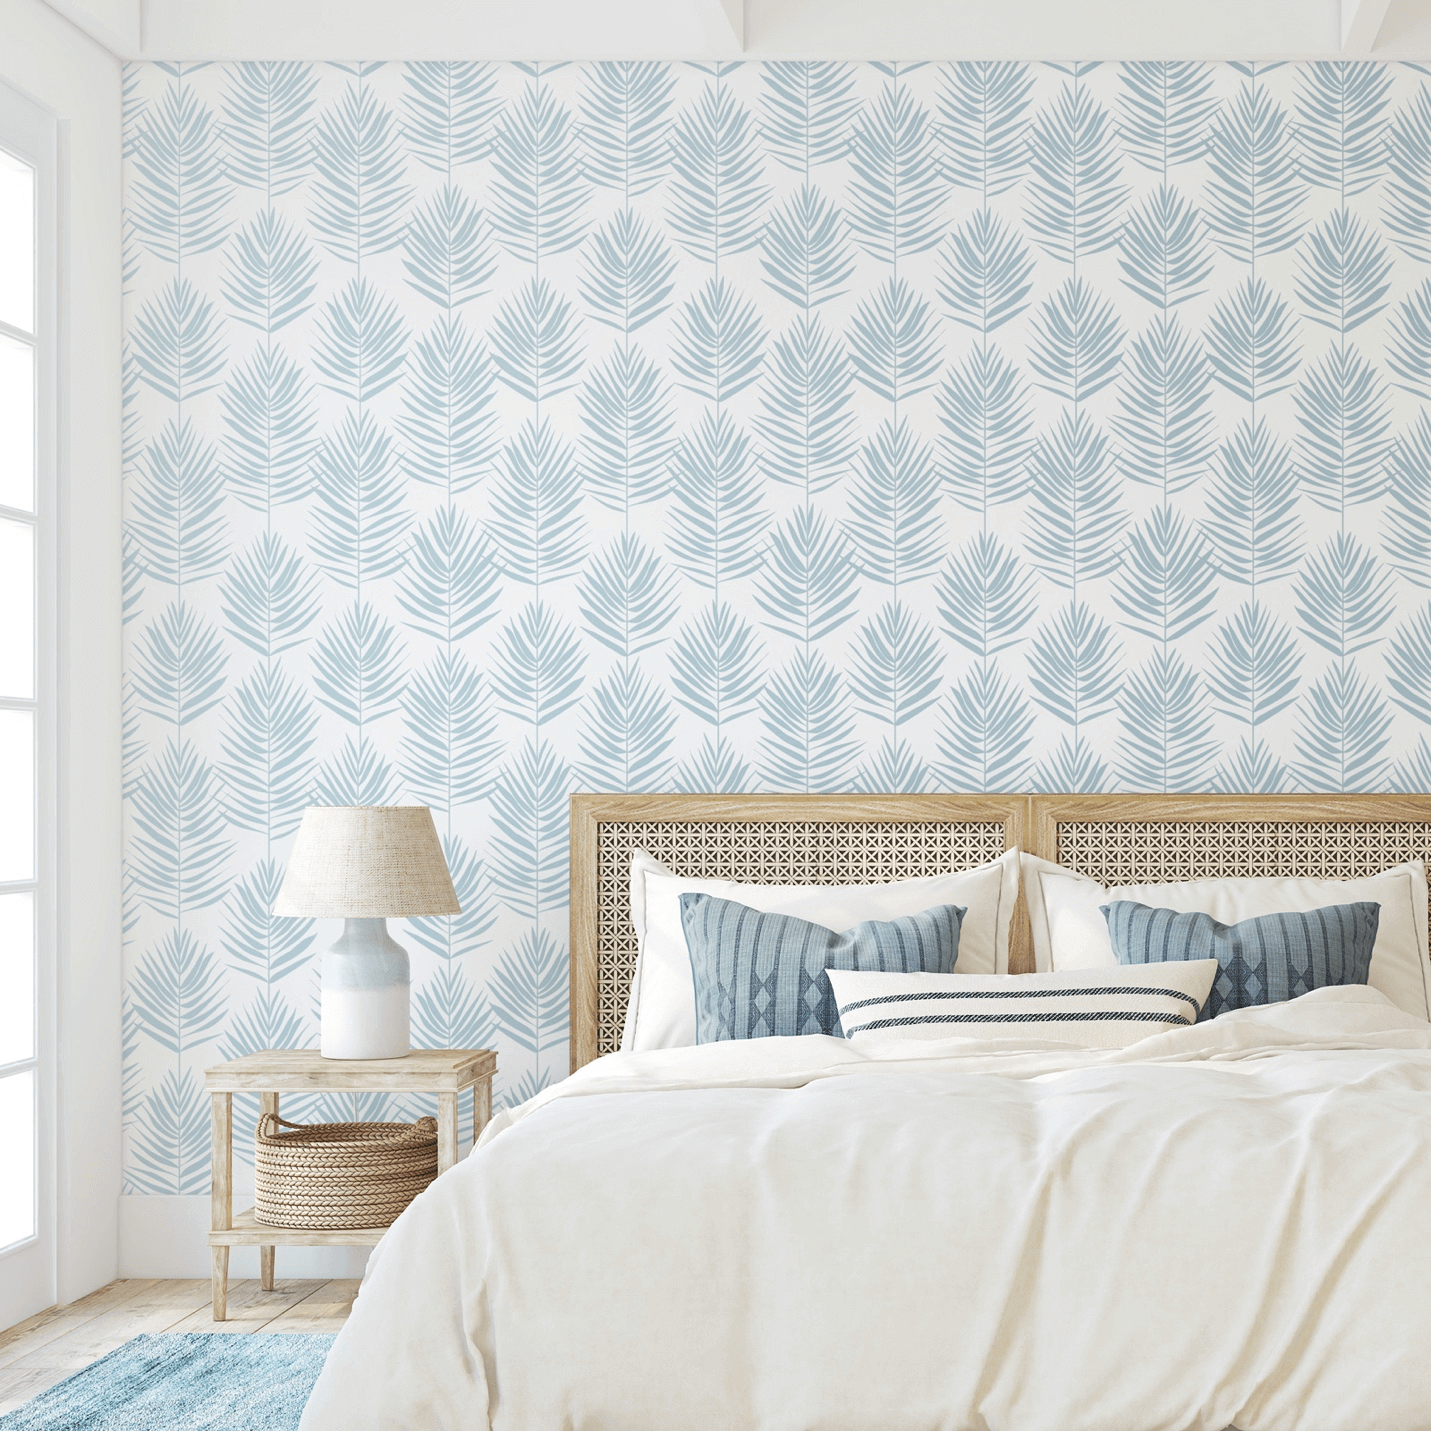 8 Changes You Can Do To Update Your Bedroom In The New Year